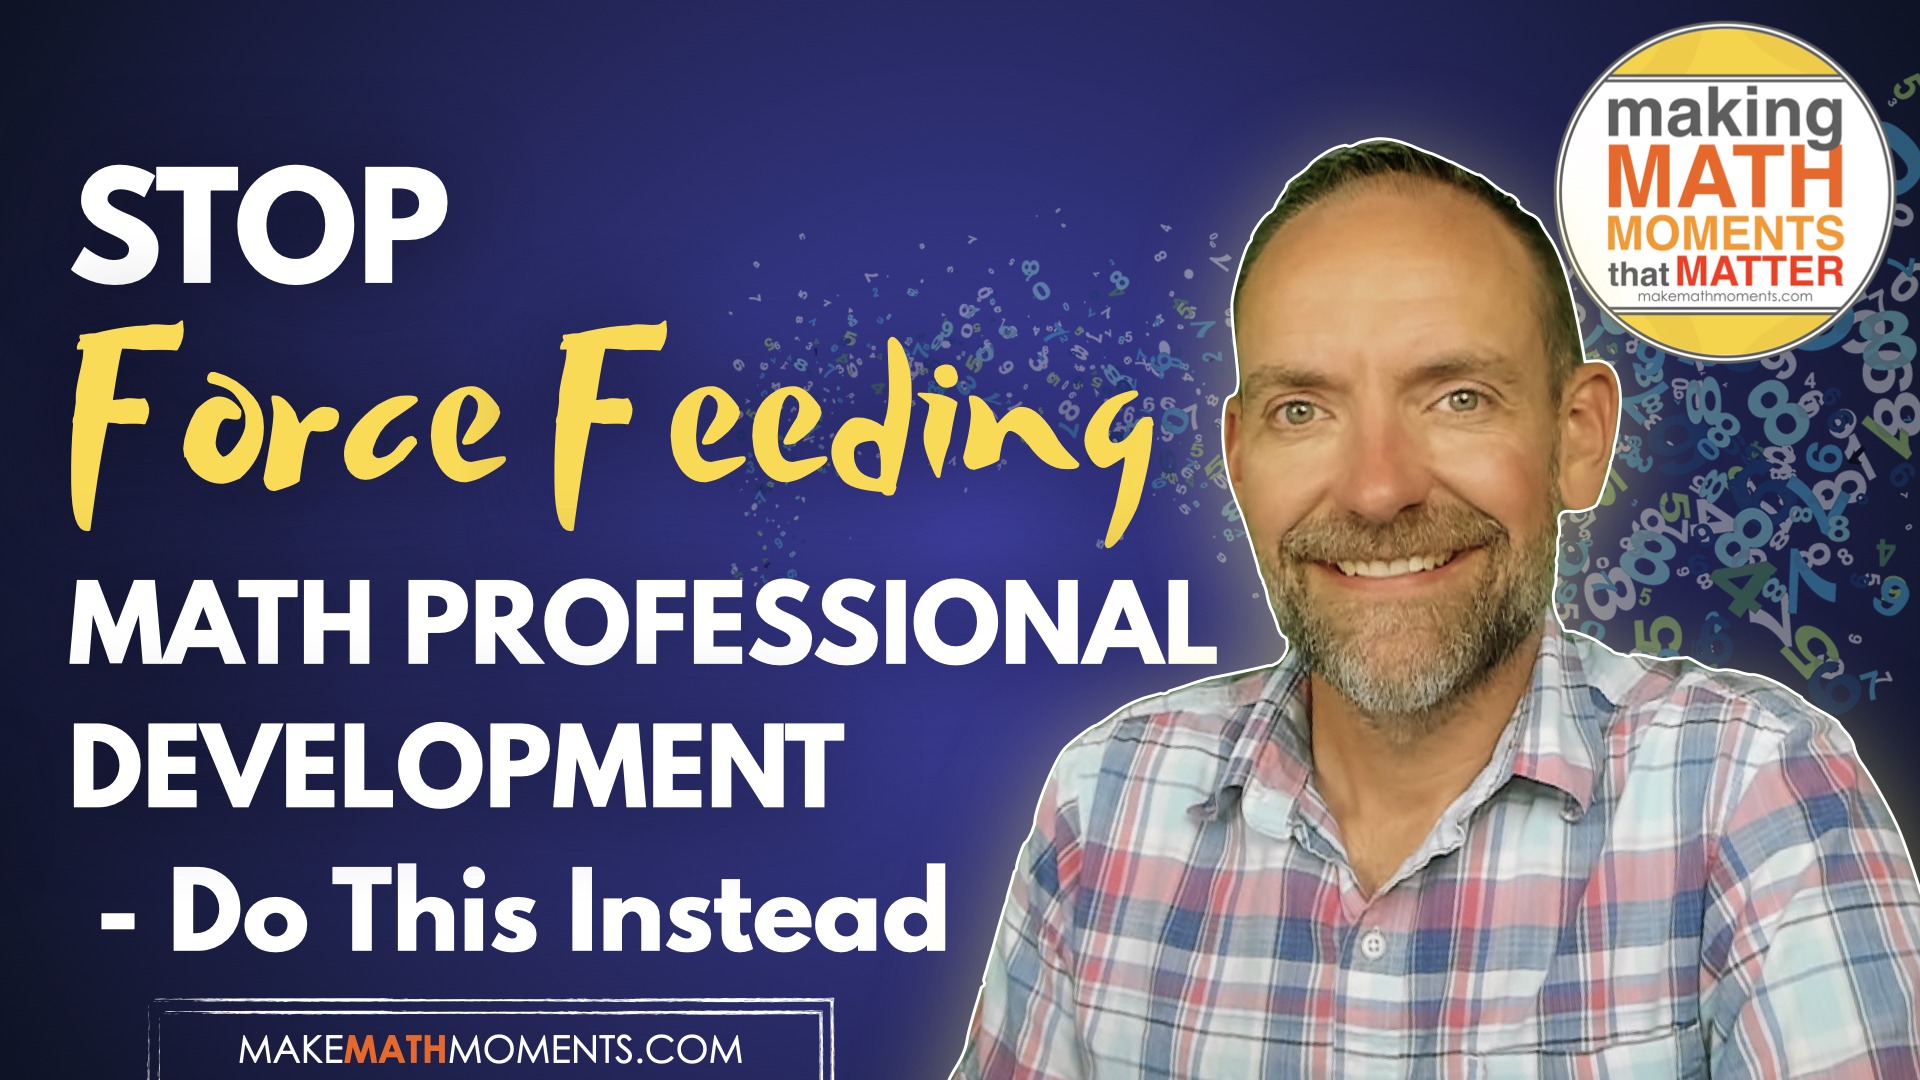 Stop Force Feeding Math Professional Development – Do This Instead